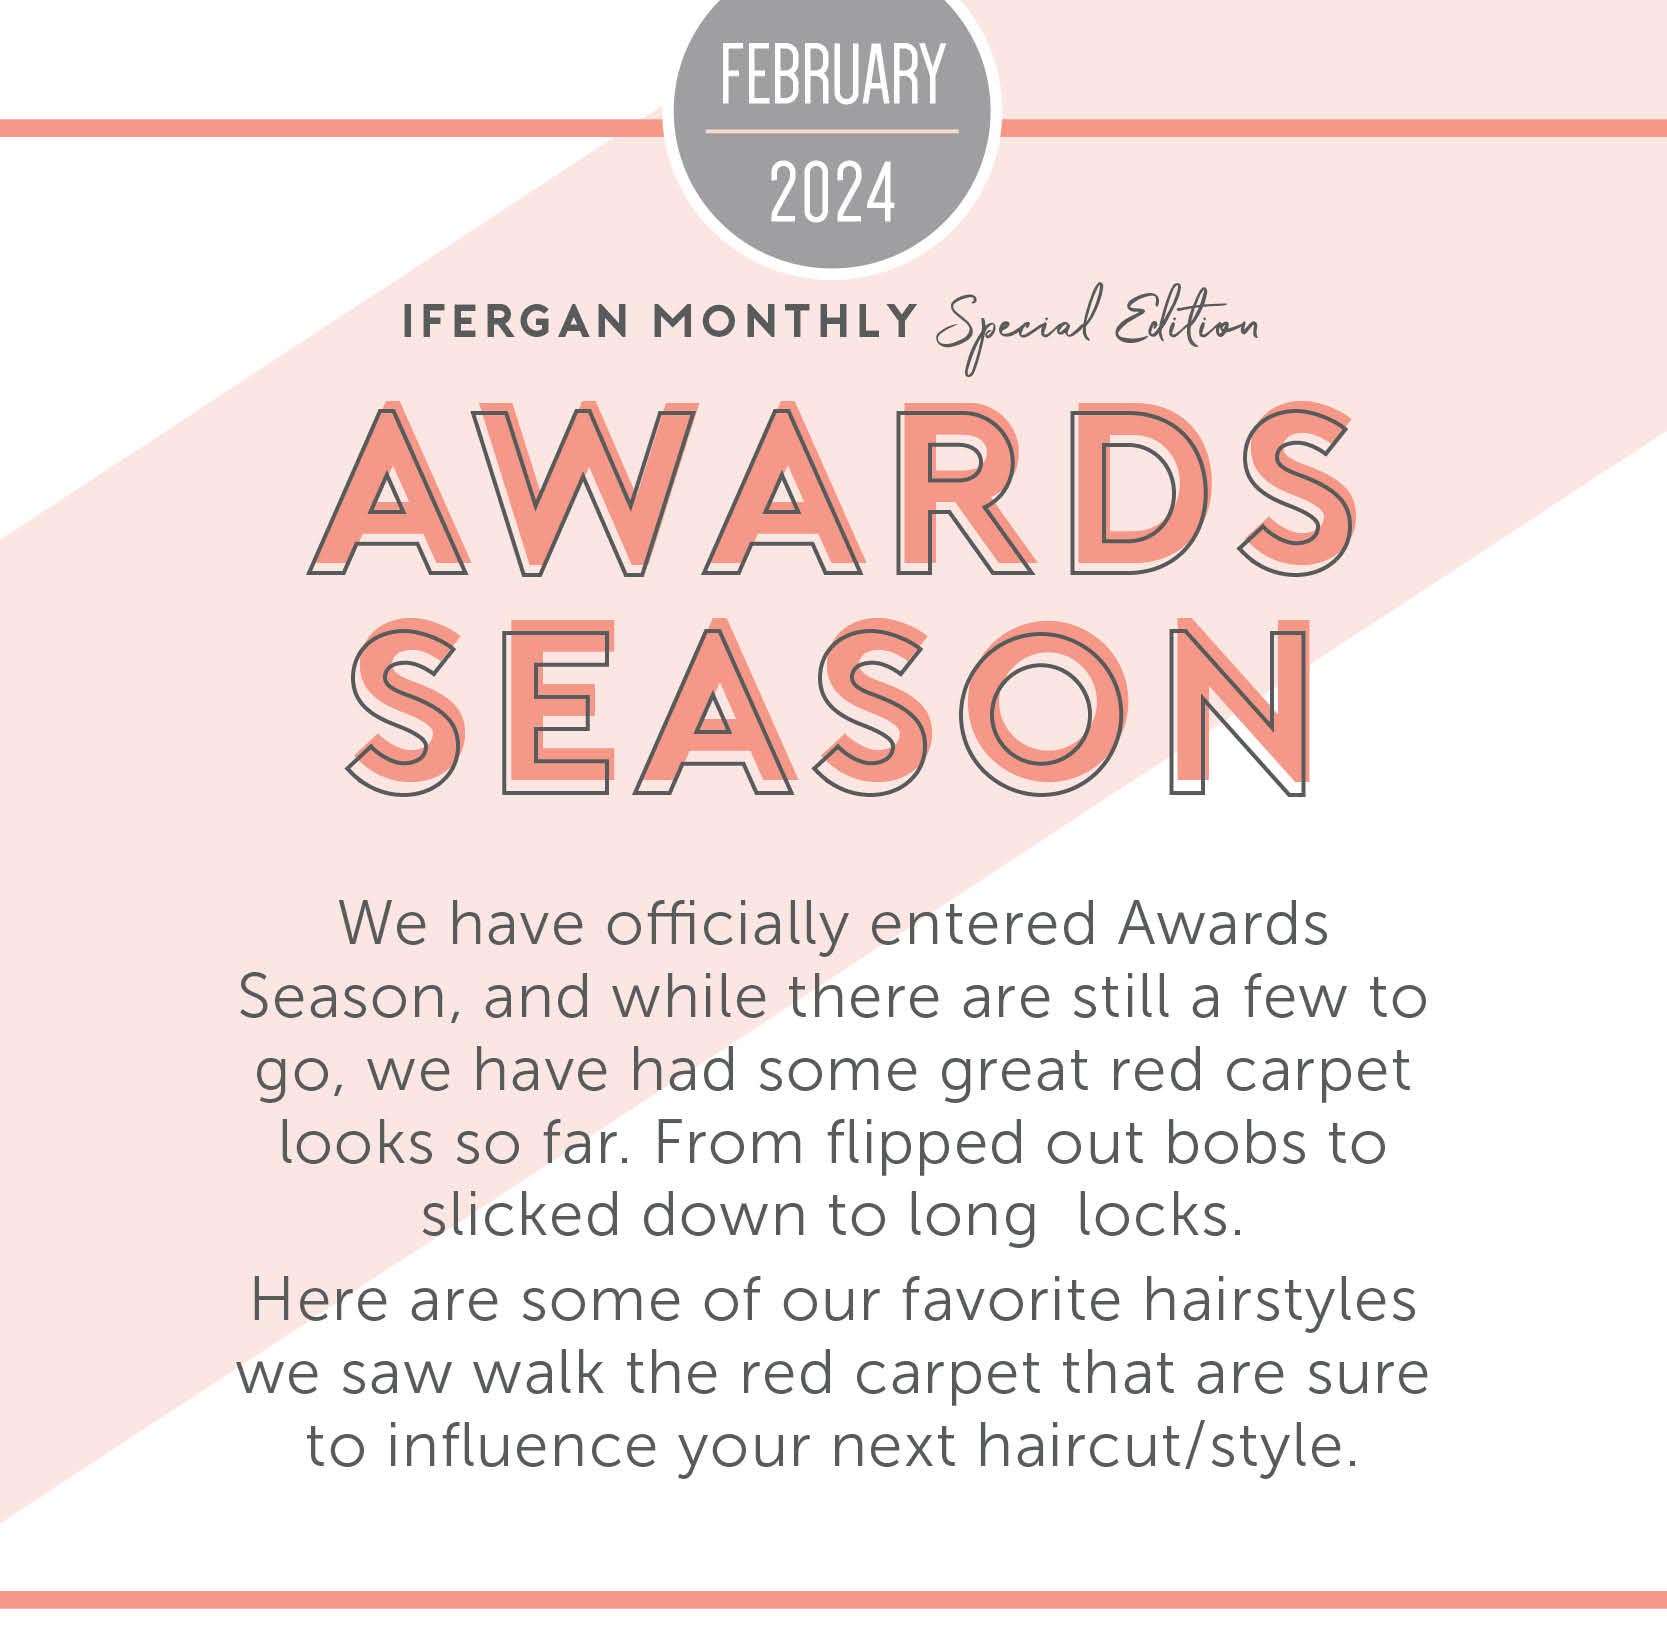 Awards Season We have officially entered Award season, and while there are still a few to go, we have had some great red carpet looks so far. From flipped out bobs to slicked down to long locks-Here are some of our favorite hairstyles we saw walk the red carpet that are sure to influence your next haircut/style. 